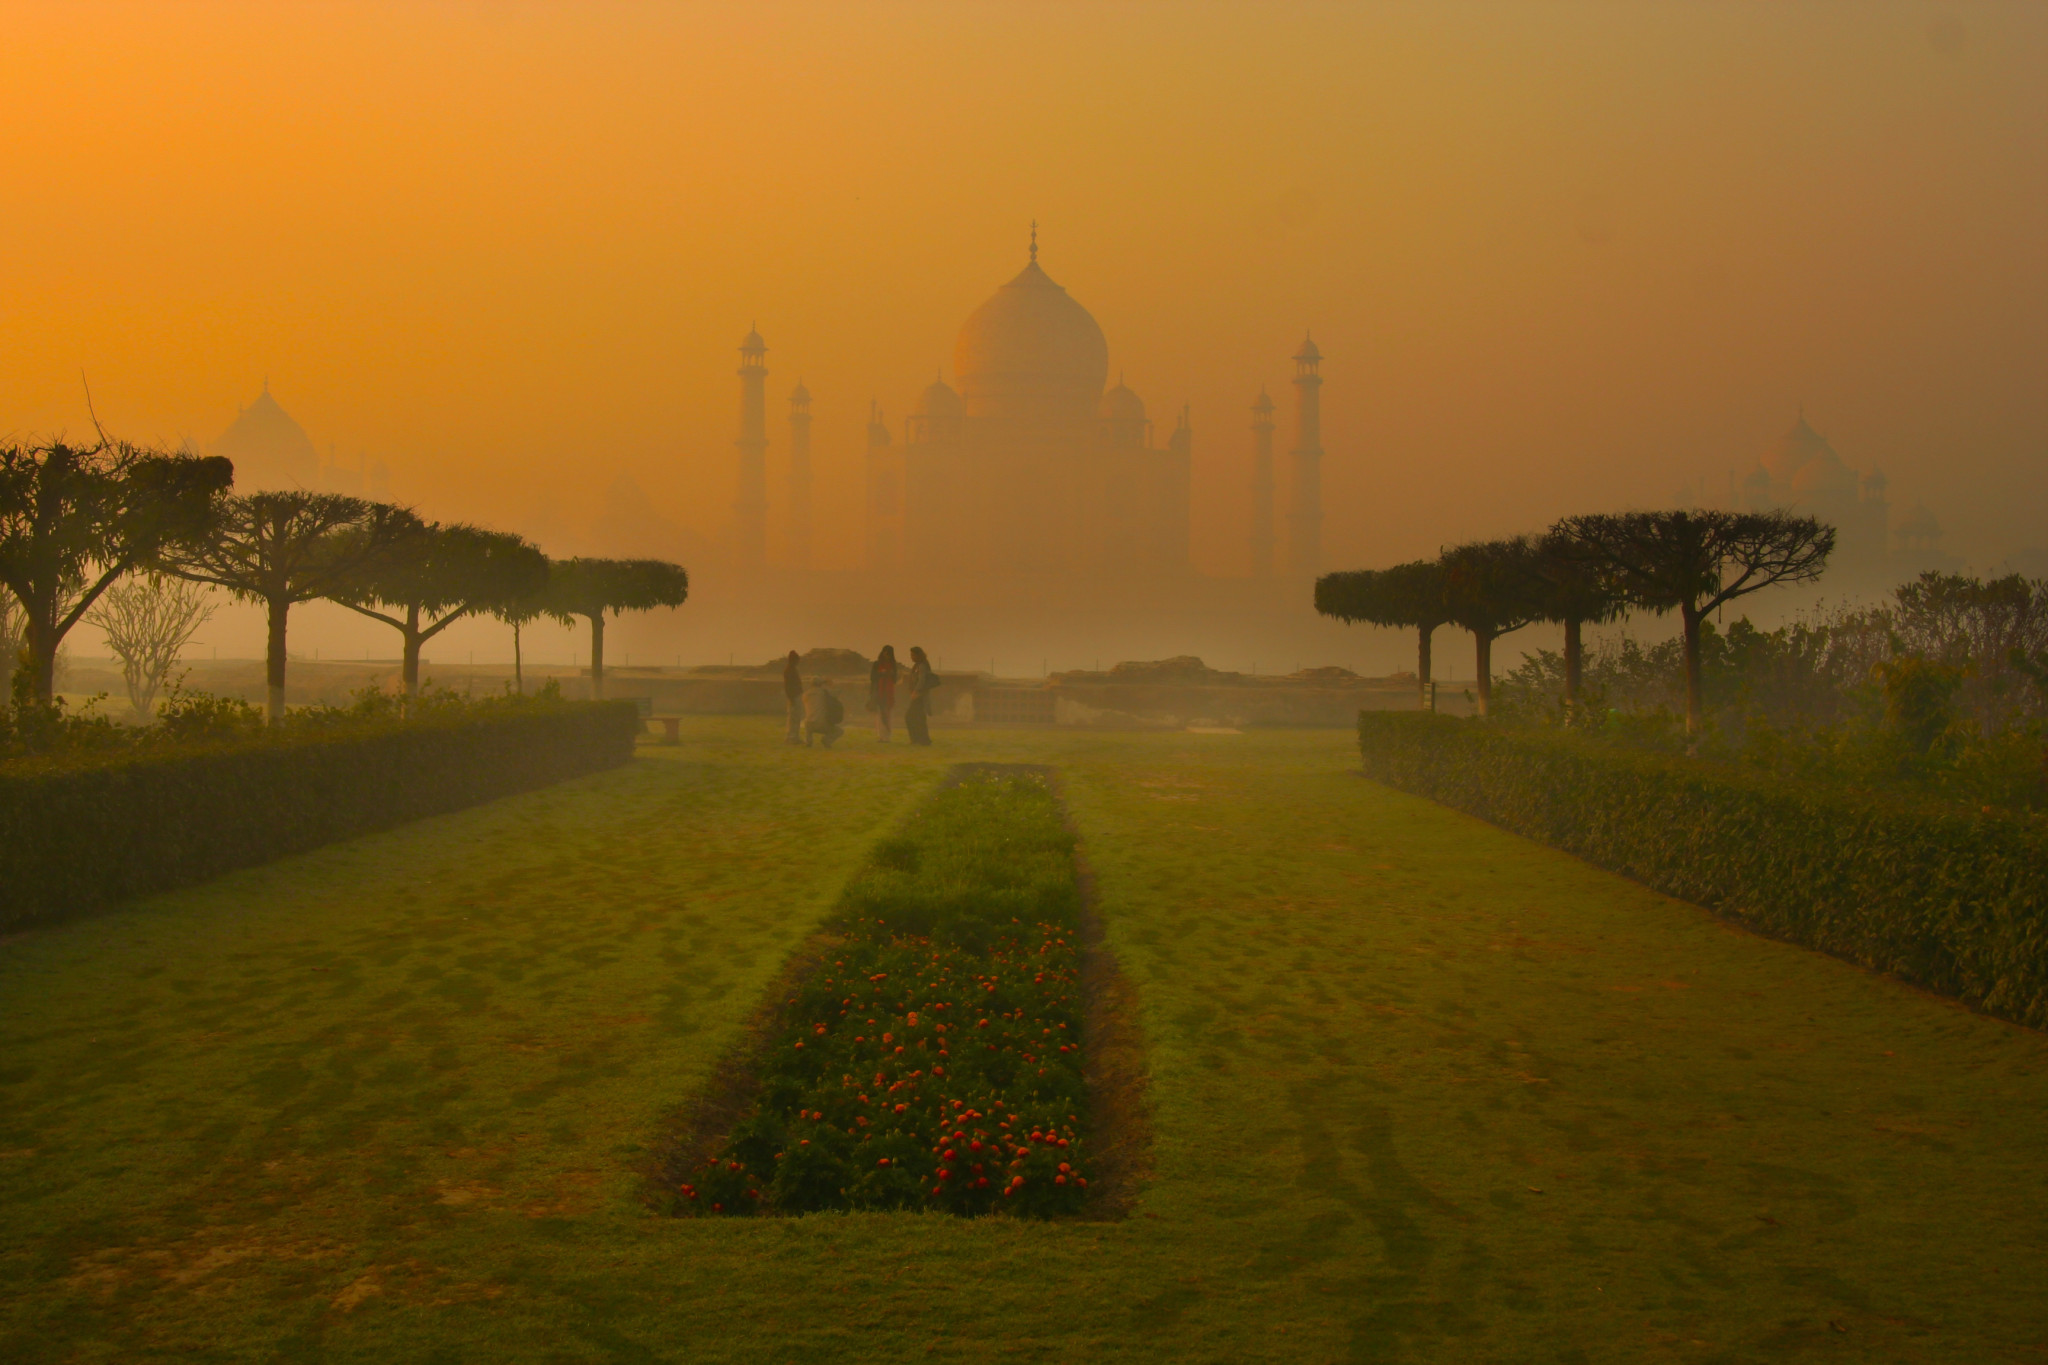 Mehtab garden - One of the must visit Tourist places in Agra